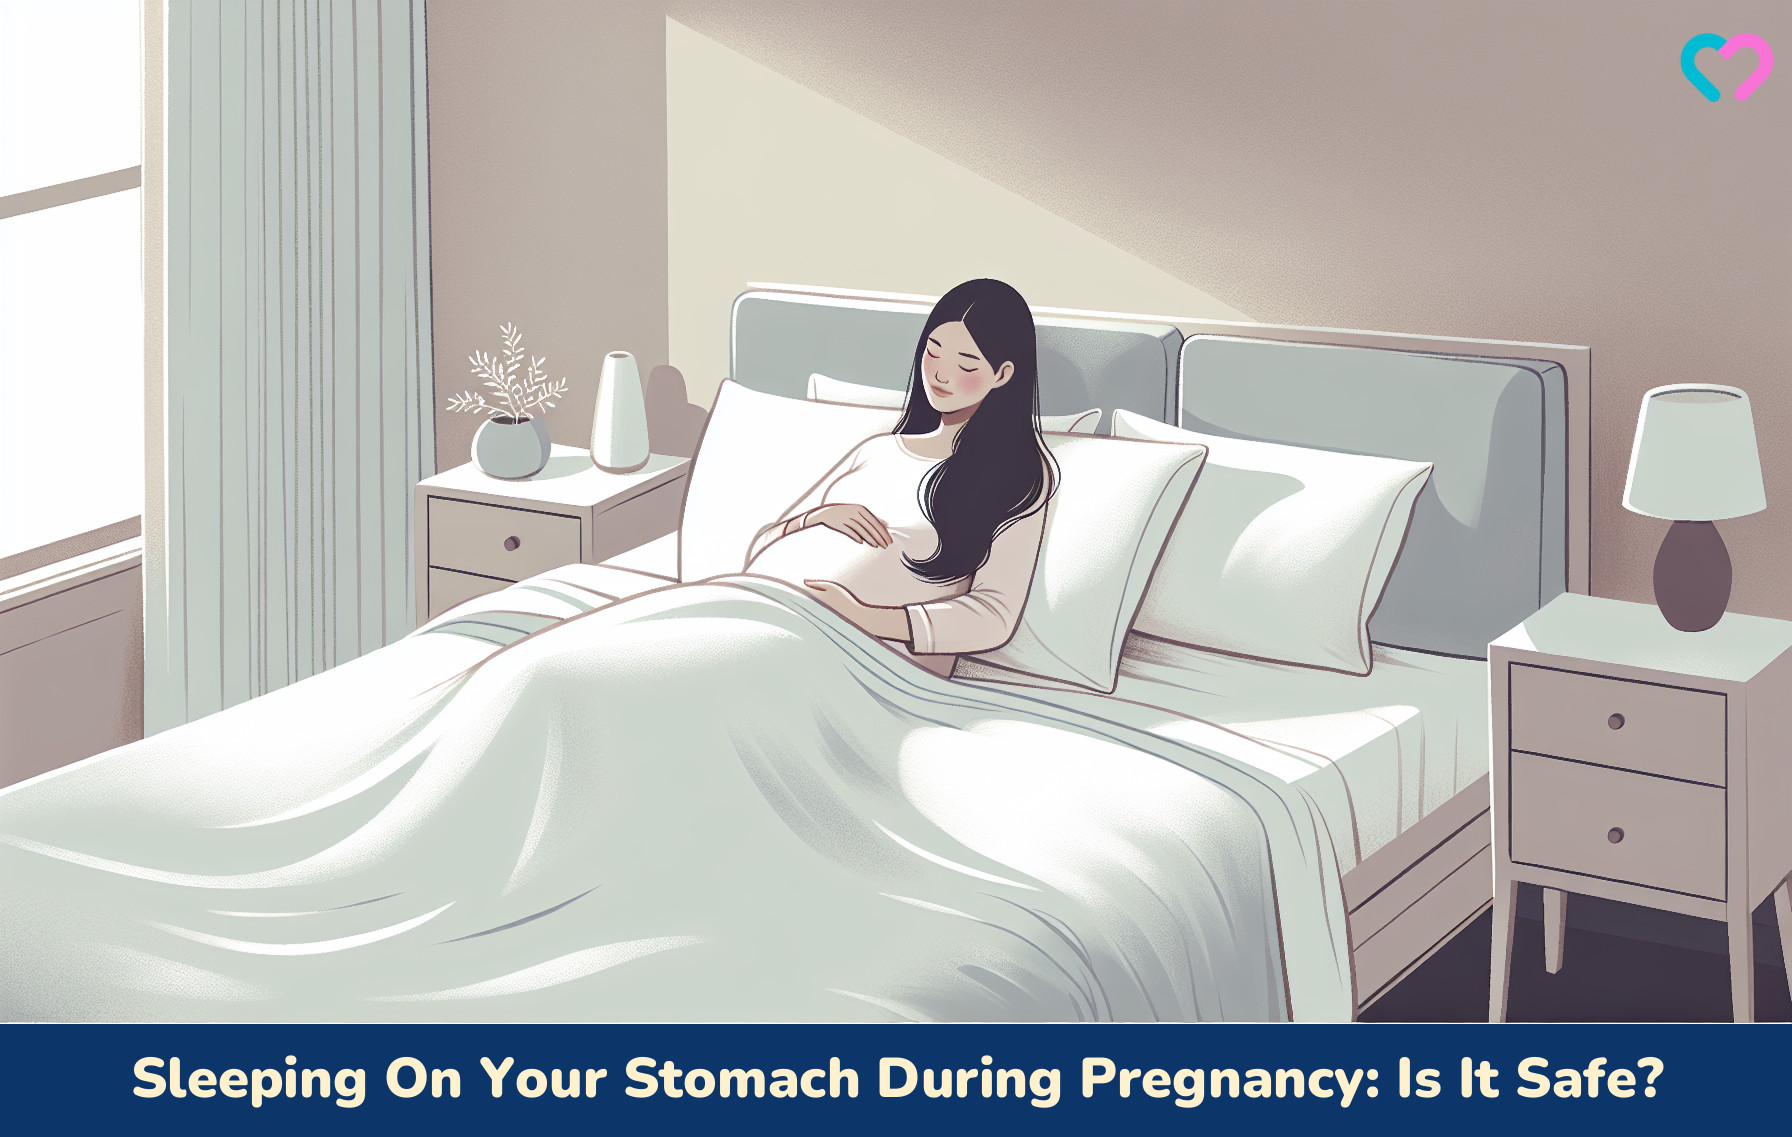 Sleeping On Your Stomach During Pregnancy: Is It Safe?